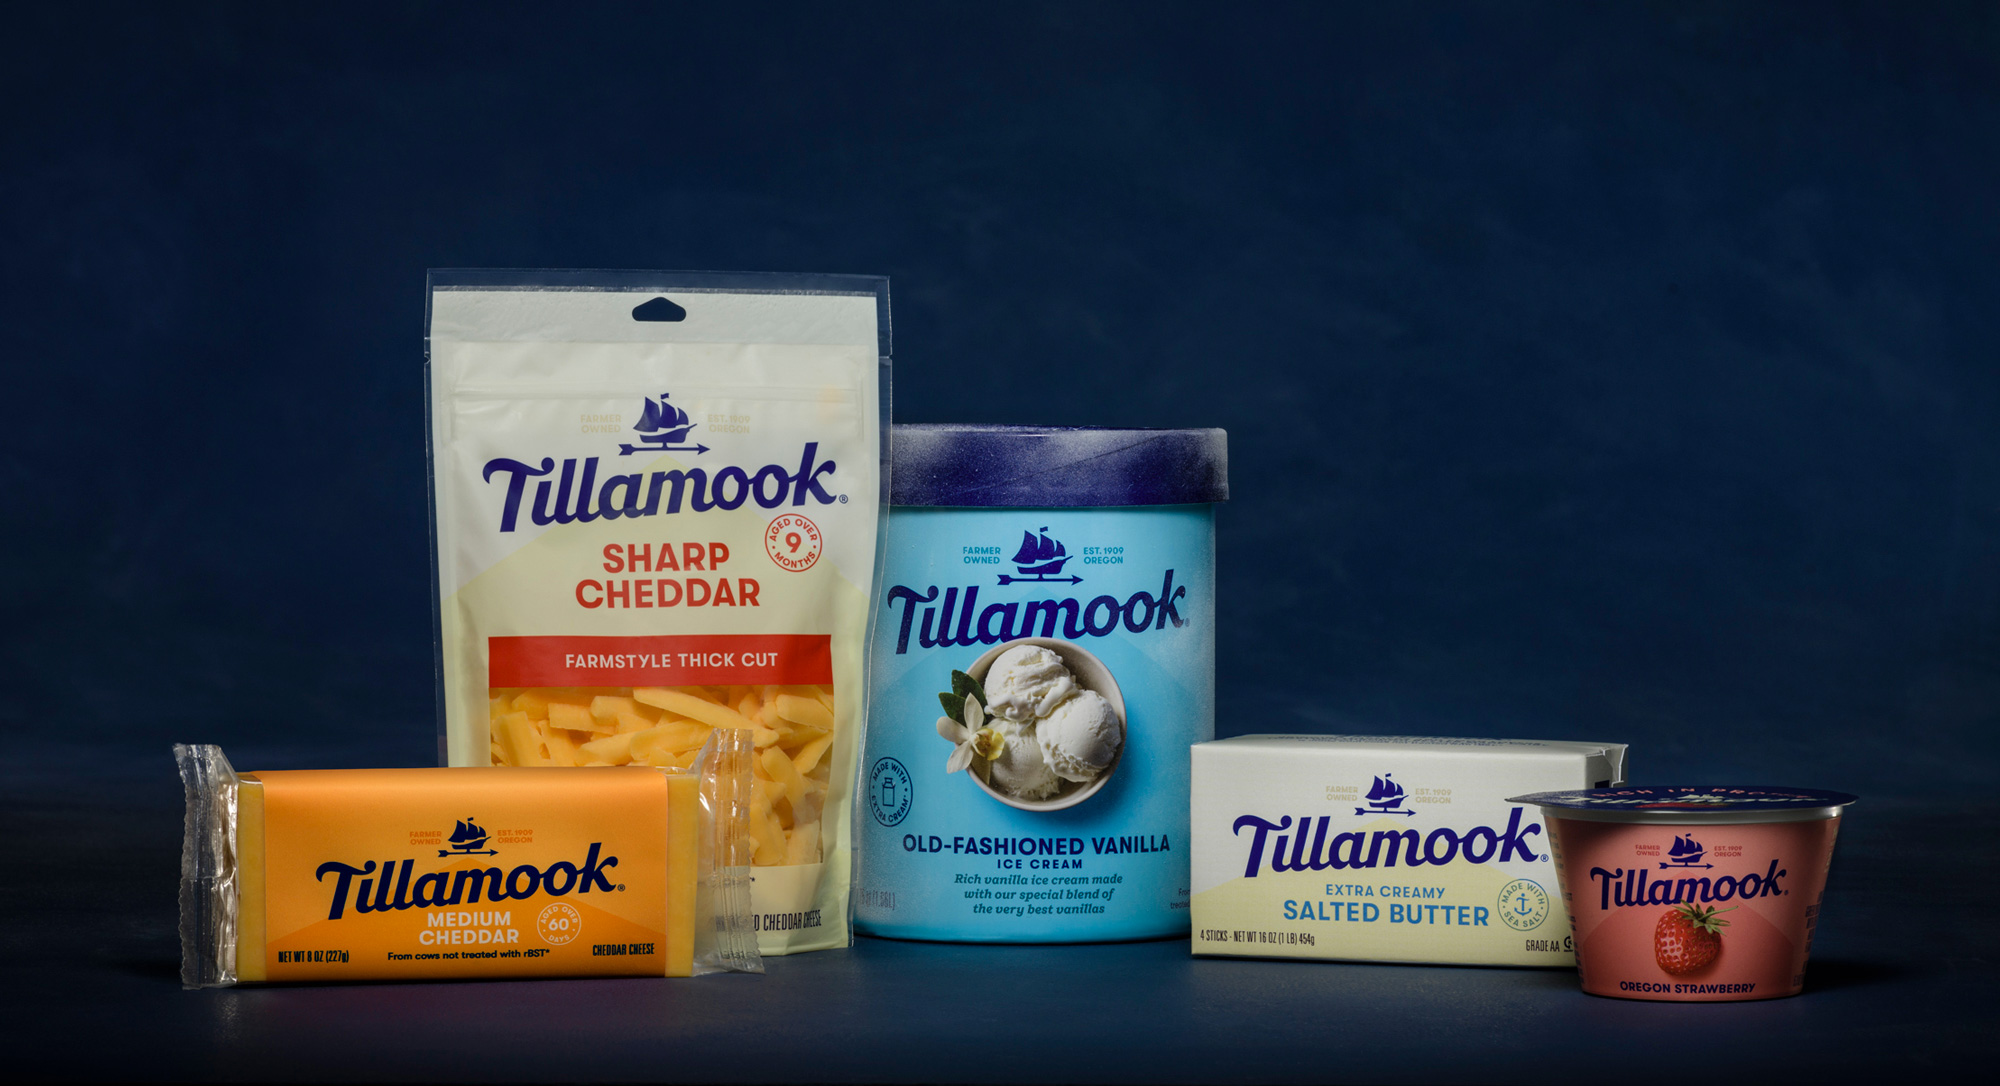 New Logo and Packaging for Tillamook by Turner Duckworth